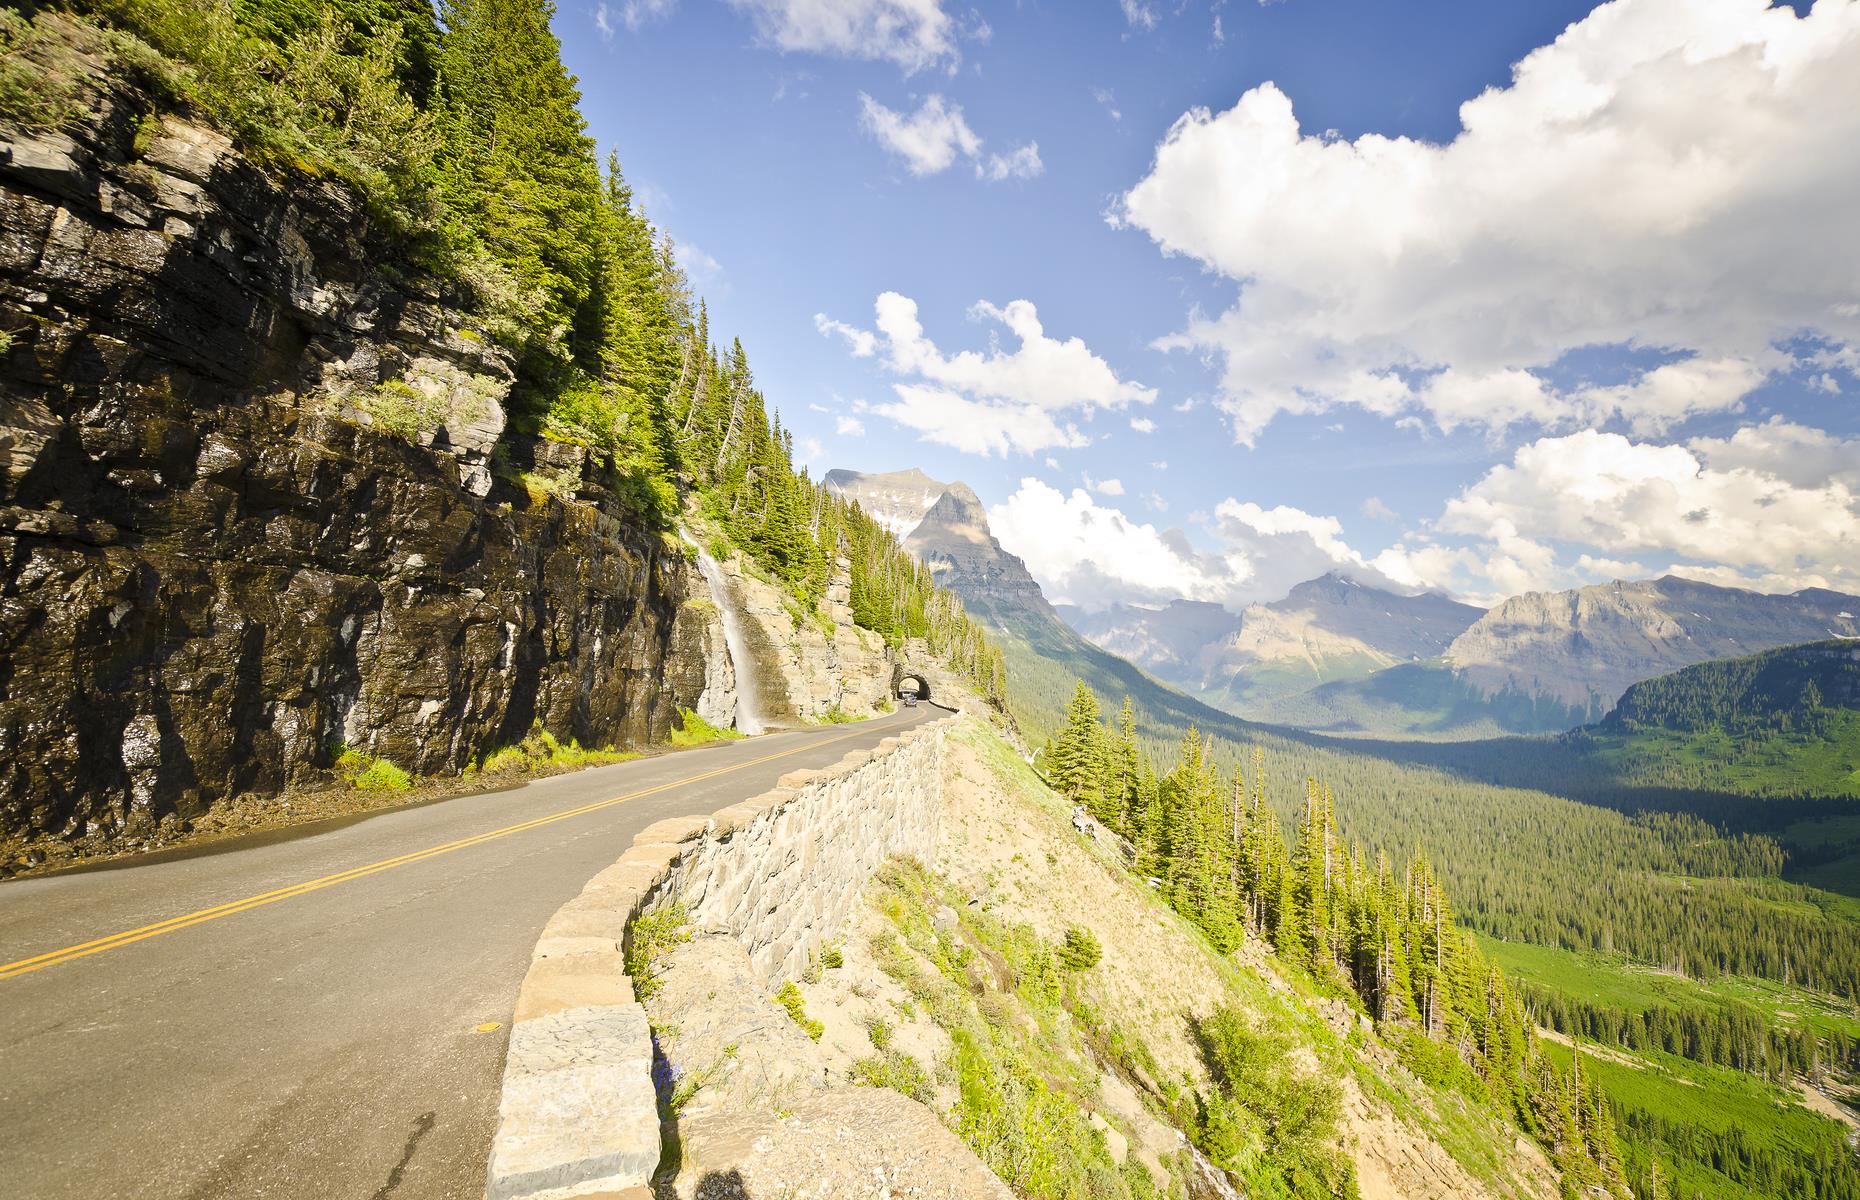 <p>You’ll need at least two hours to drive this 50-mile (80km) <a href="https://www.nps.gov/glac/planyourvisit/gtsrinfo.htm">iconic mountain road</a>, which zig-zags vertiginously in Glacier National Park. You’ll want to spend a lot longer, though, as the reasons to pull over and gaze at the views are endless. Keep watch for mountain goats and bighorn sheep, which graze on the slopes, and plan to stop at Jackson Glacier Overlook for pine-fringed views of the park’s seventh largest glacier. Sometimes part of the road might be closed, so be sure to always check the website for alternative routes.</p>